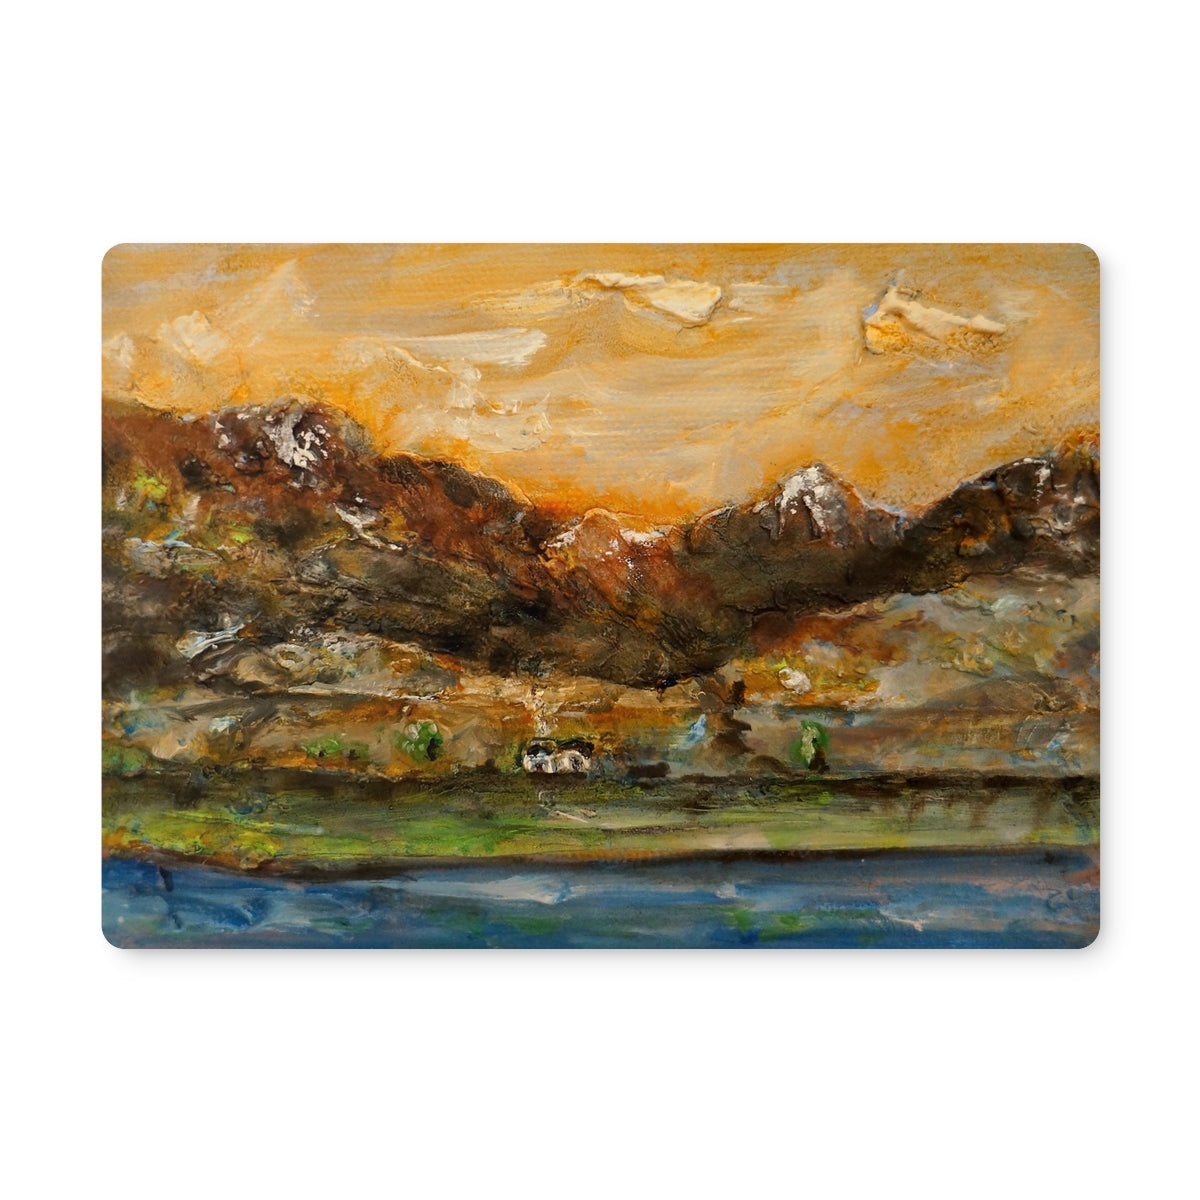 A Glencoe Cottage Art Gifts Placemat-Placemats-Glencoe Art Gallery-6 Placemats-Paintings, Prints, Homeware, Art Gifts From Scotland By Scottish Artist Kevin Hunter